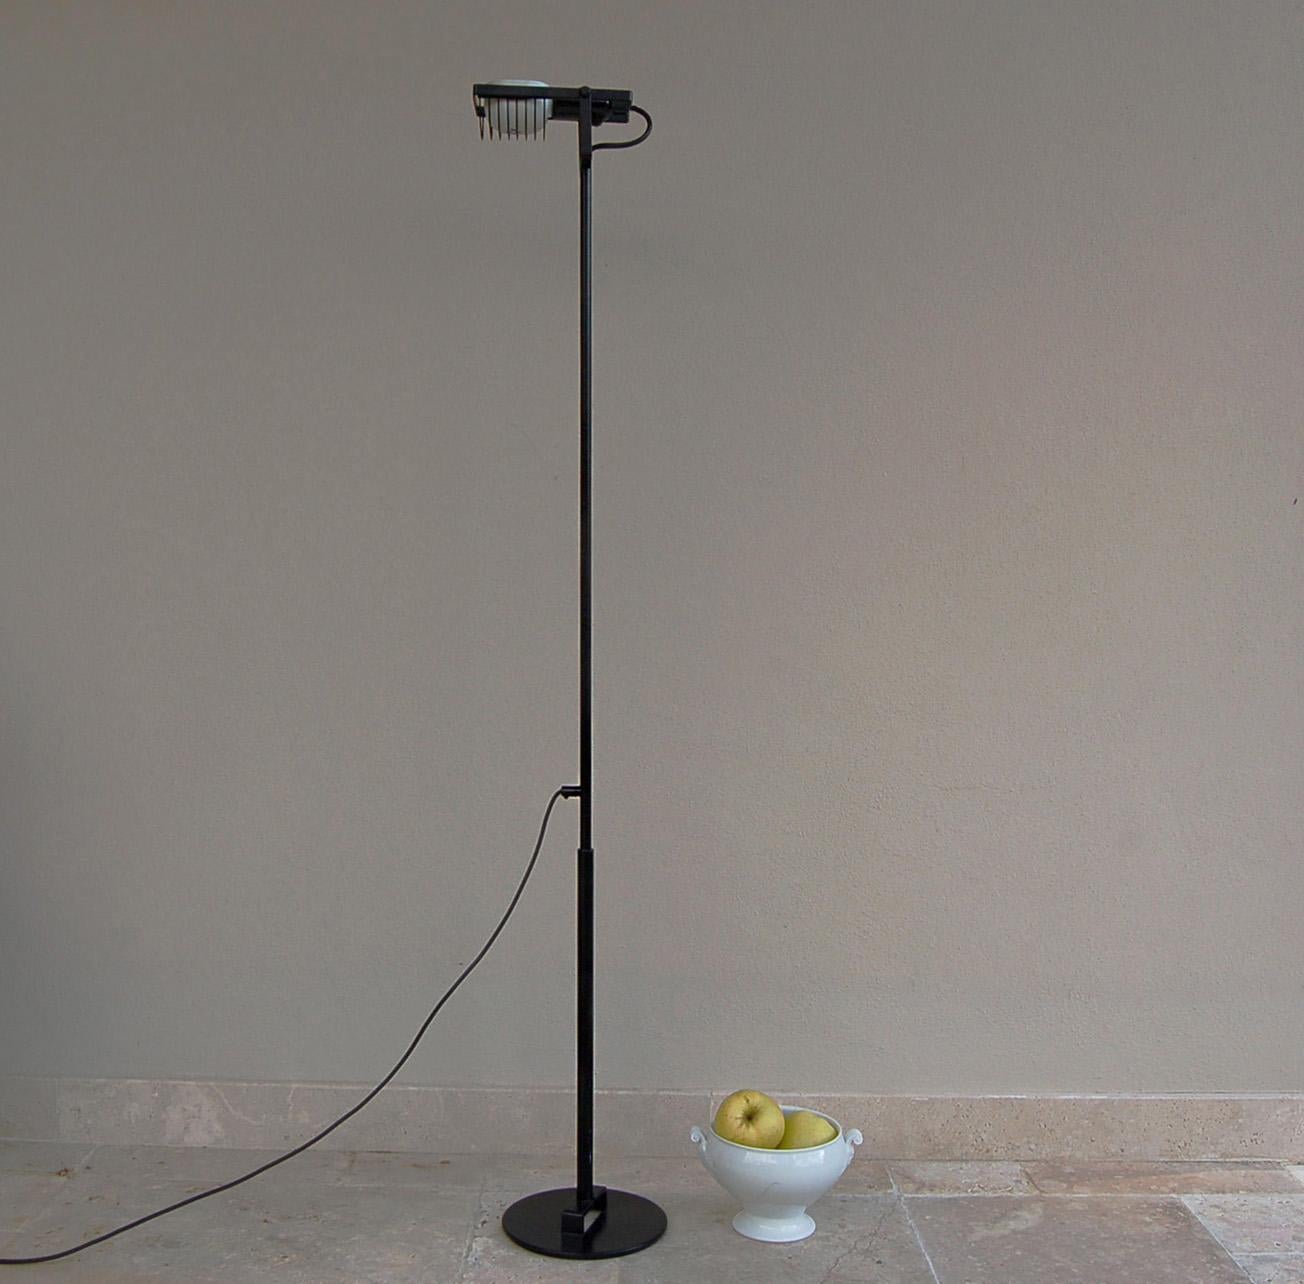 Artemide ''Sintesi terra'' is an adjustable and extendable floor lamp in black lacquered metal. This lamp is a model from 80s with silver-painted aluminum lampshade and E27 lightbulb socket. Height varies from 147-183 cm approximate base diameter